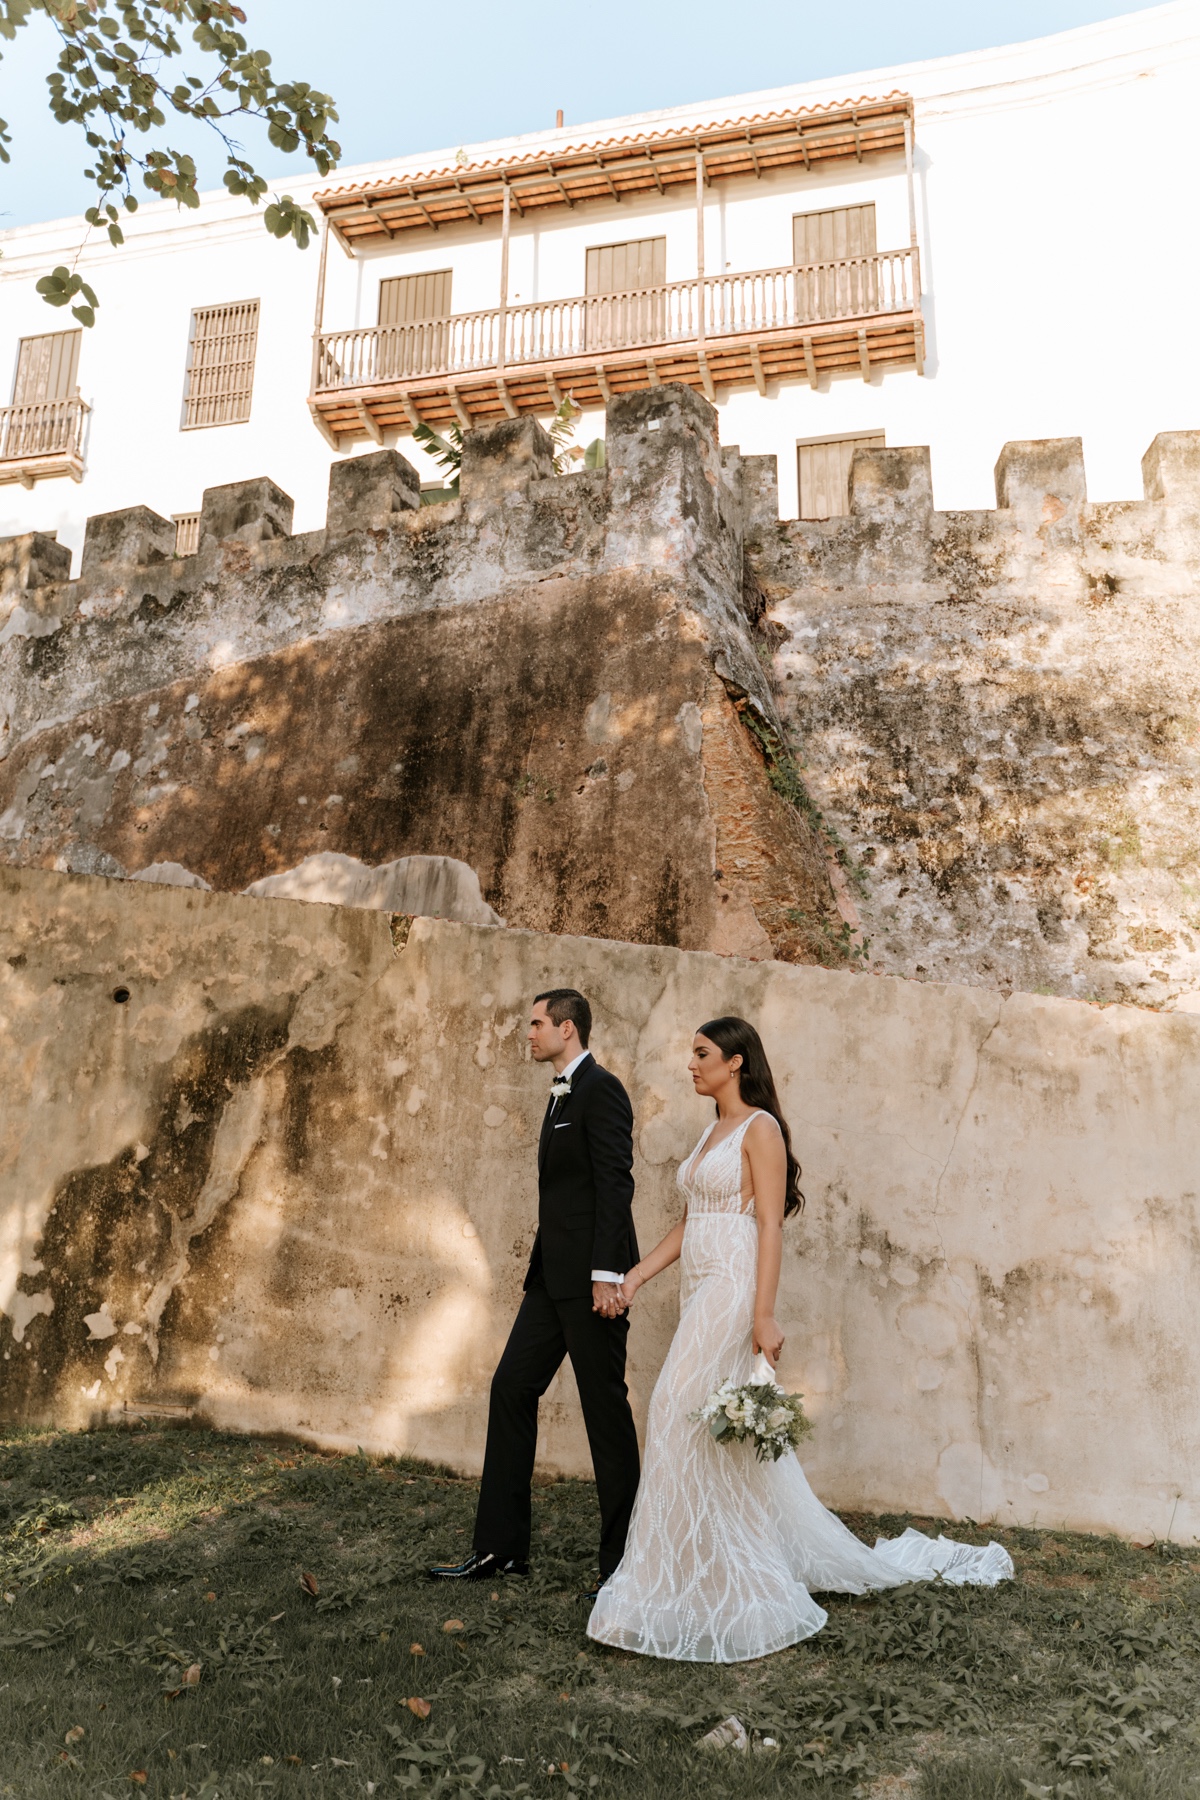 A Classic Wedding At A Coveted Venue In Old San Juan, Puerto Rico